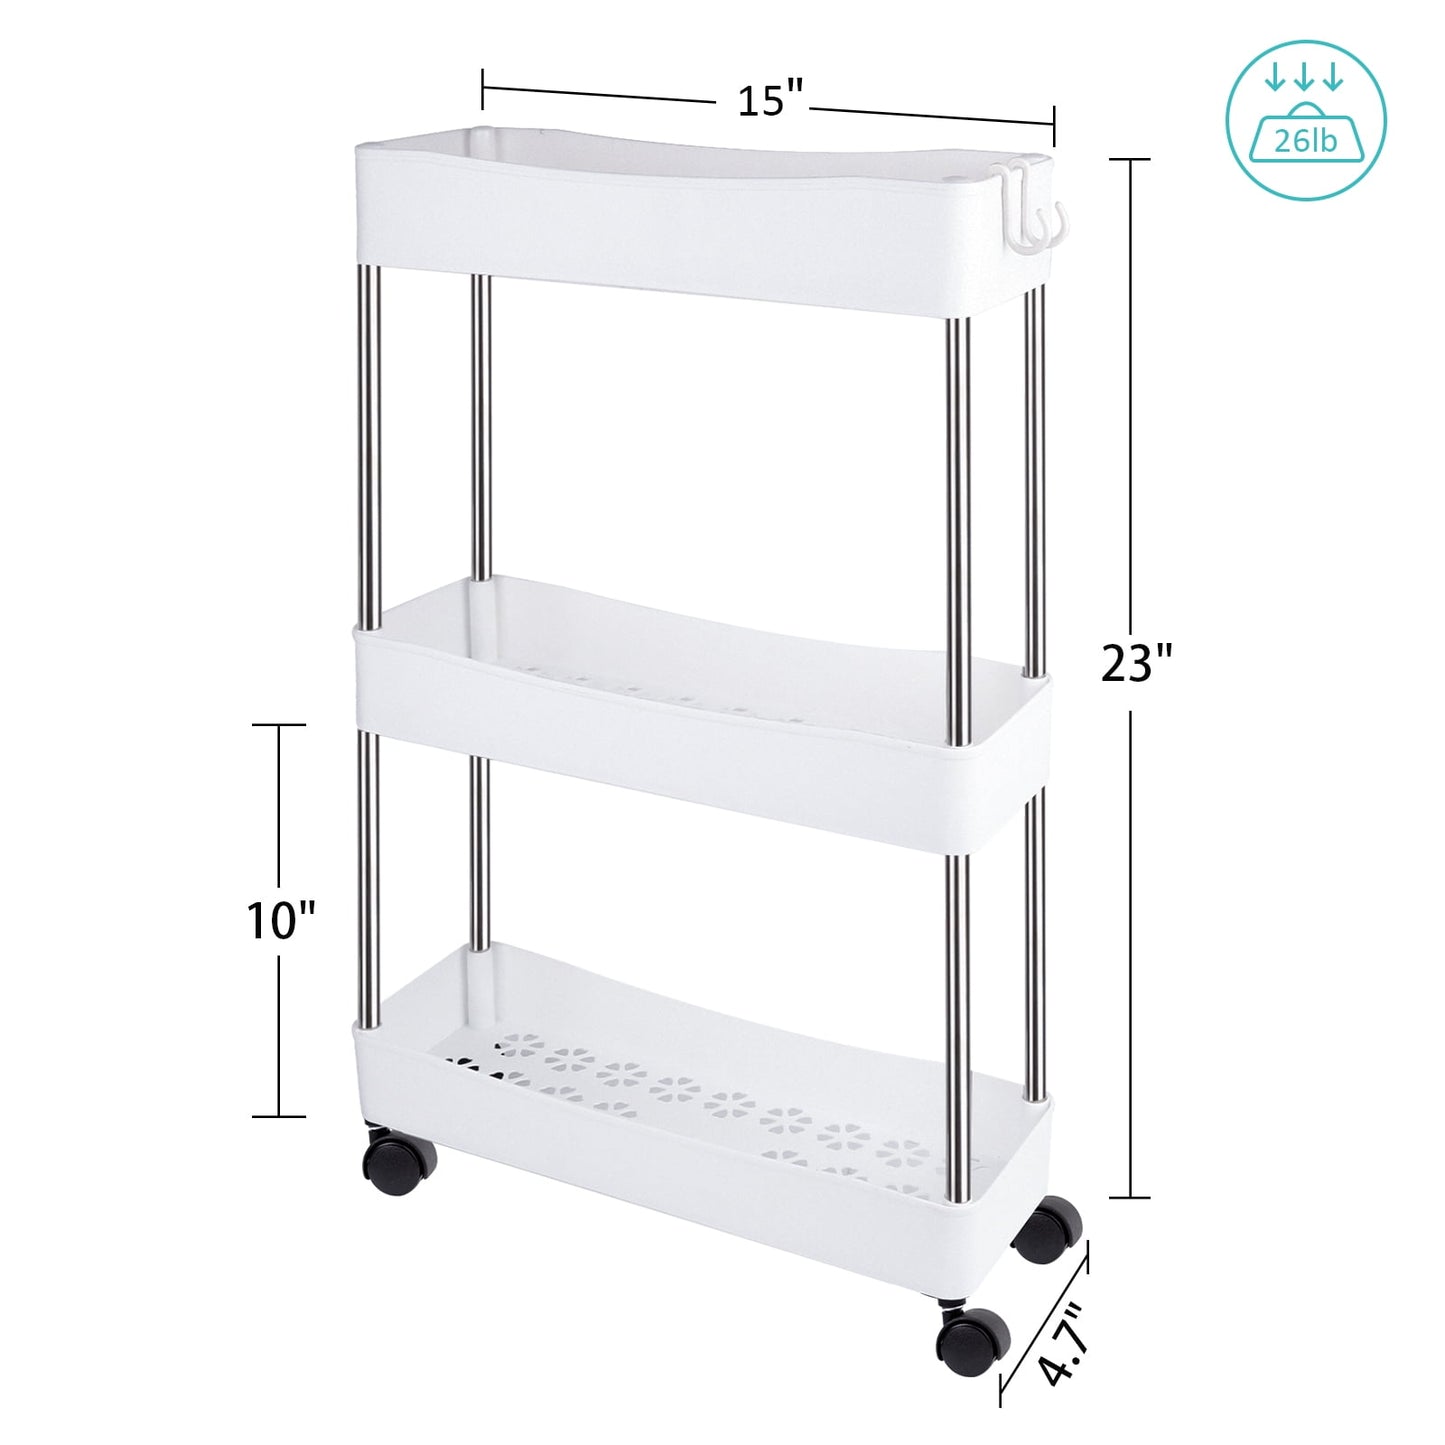 LAYADO 4 Tier Rolling Cart, Slim Rolling Storage Cart with Wheels White Rolling Utility Cart Narrow Storage Organizer for Offices Bathroom Laundry Room